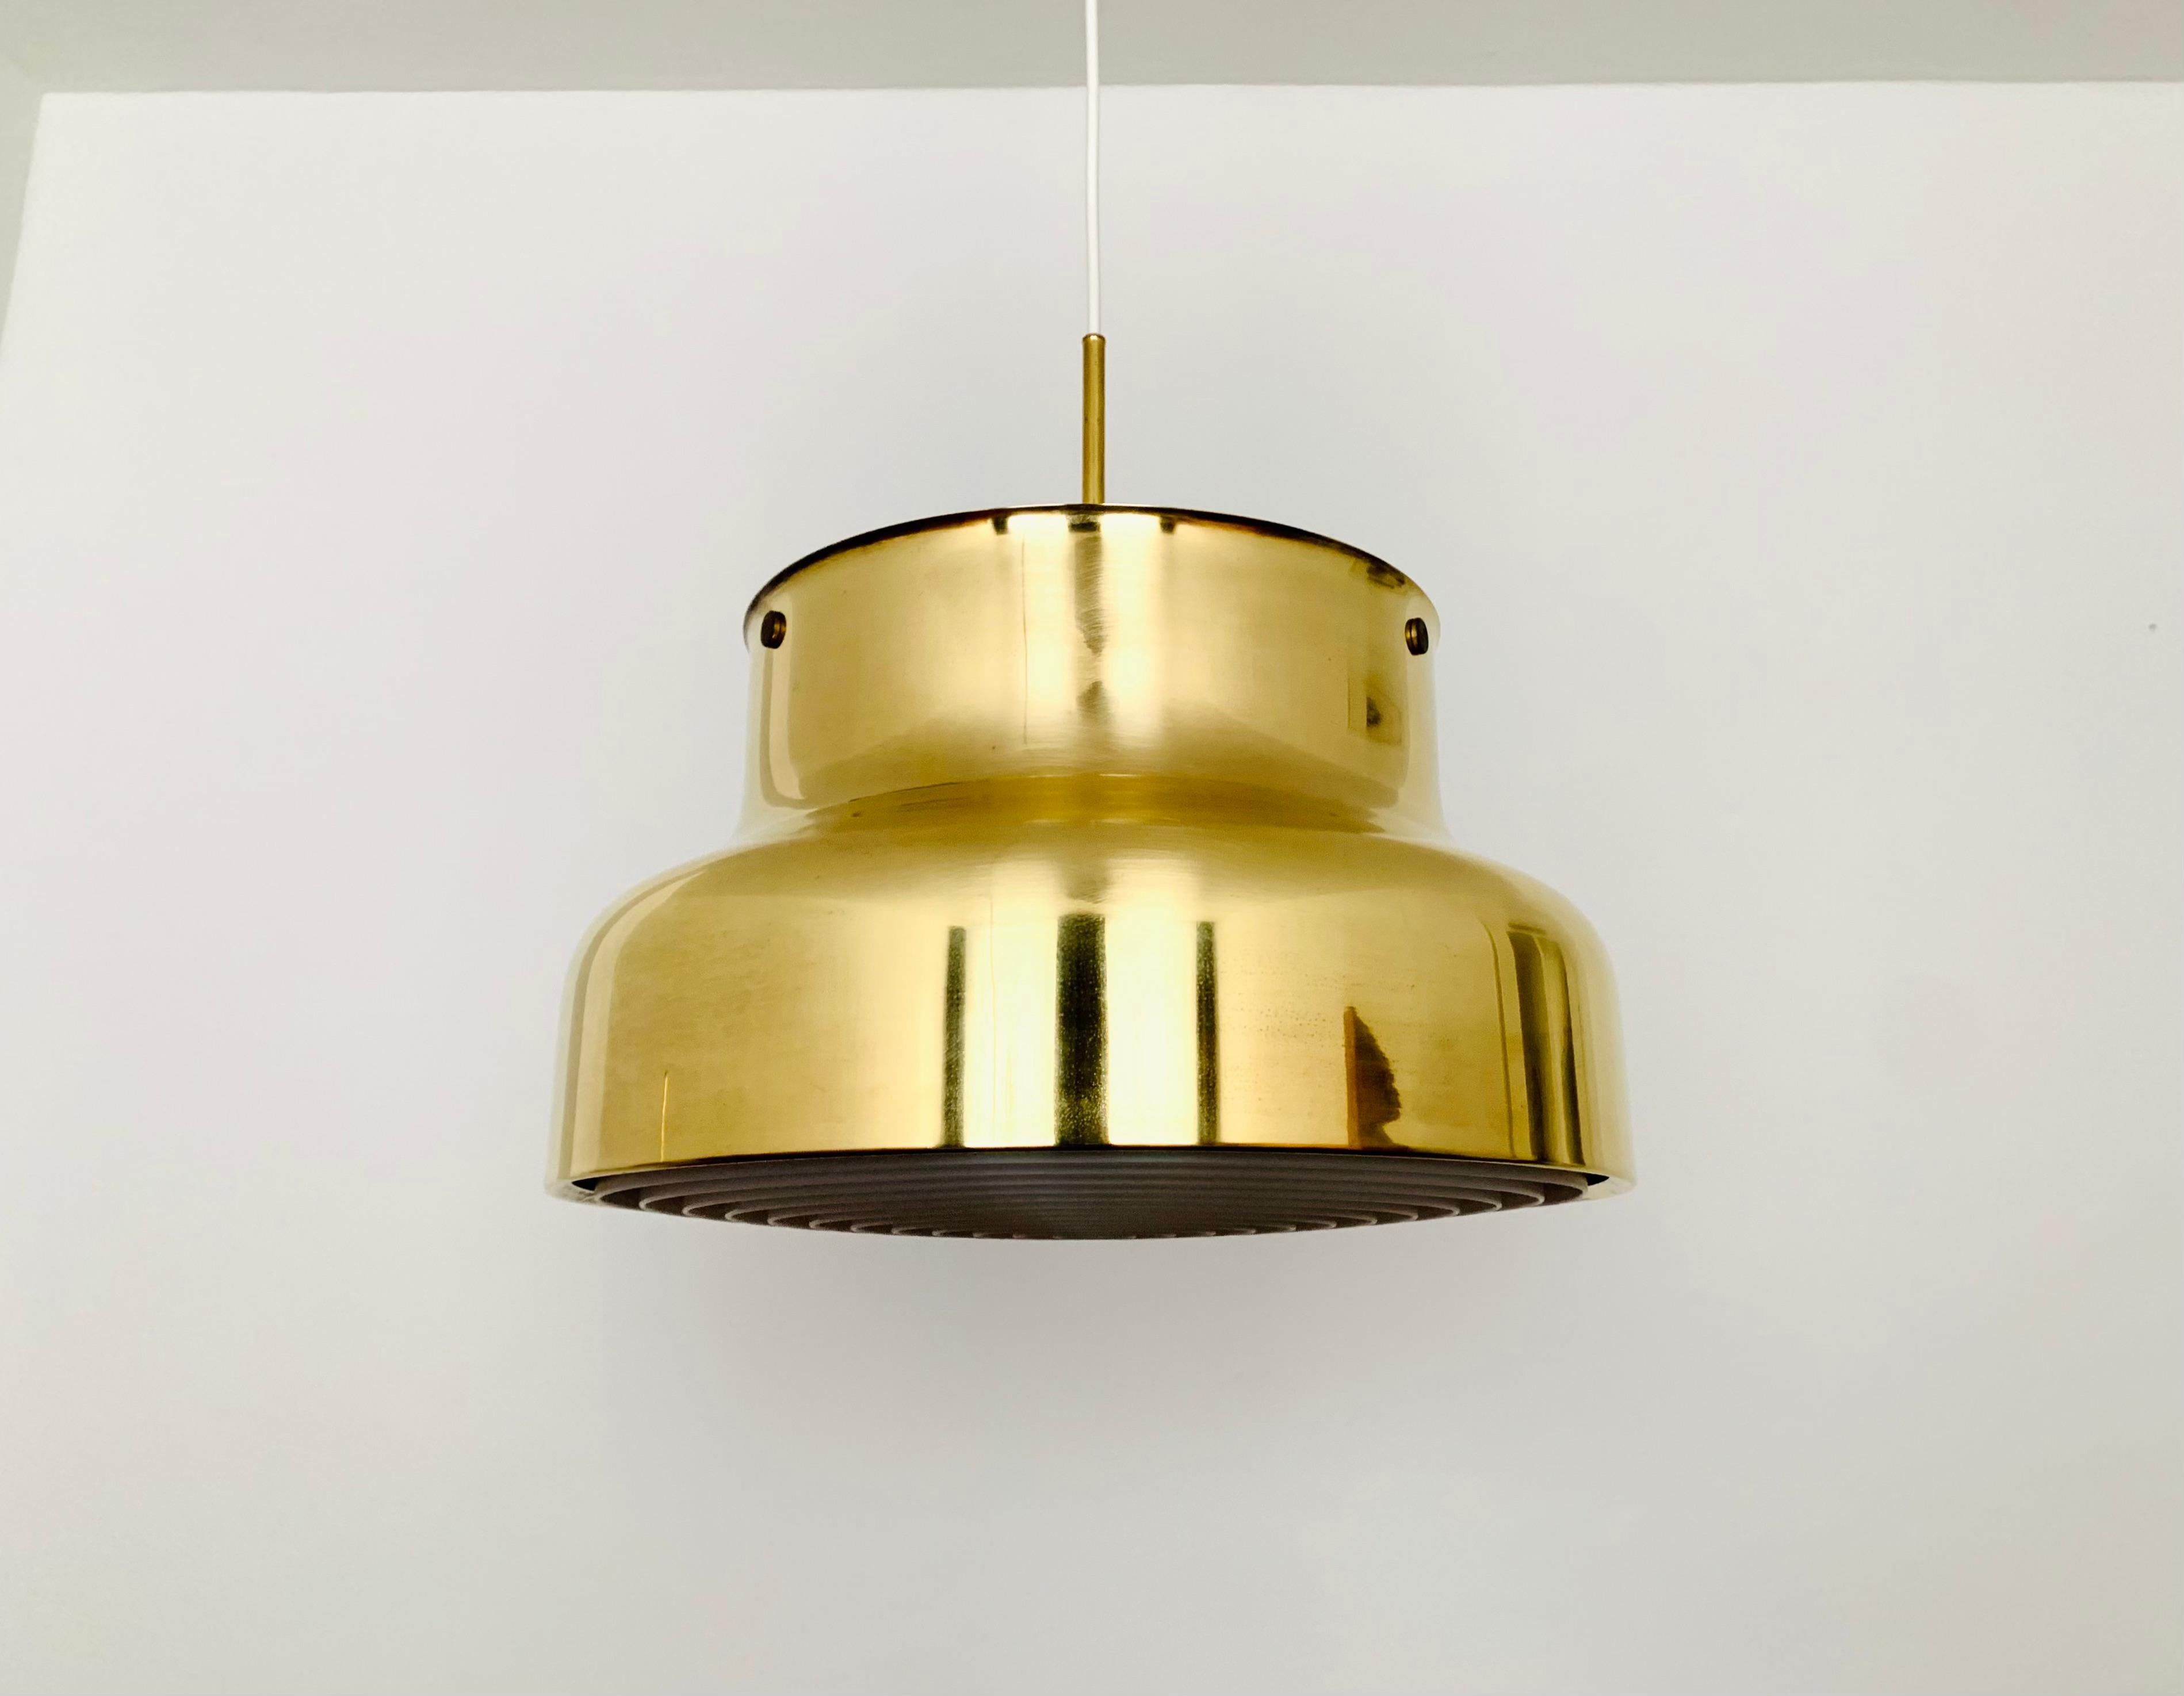 Wonderful Bumling pendant lamp with reflector from the 1960s.
The design makes the lamp a real asset and an absolute favorite for every home.
A very beautiful play of light is created.

Design: Anders Pehrson
Manufacturer: Atelje Lyktan
Ahush

The